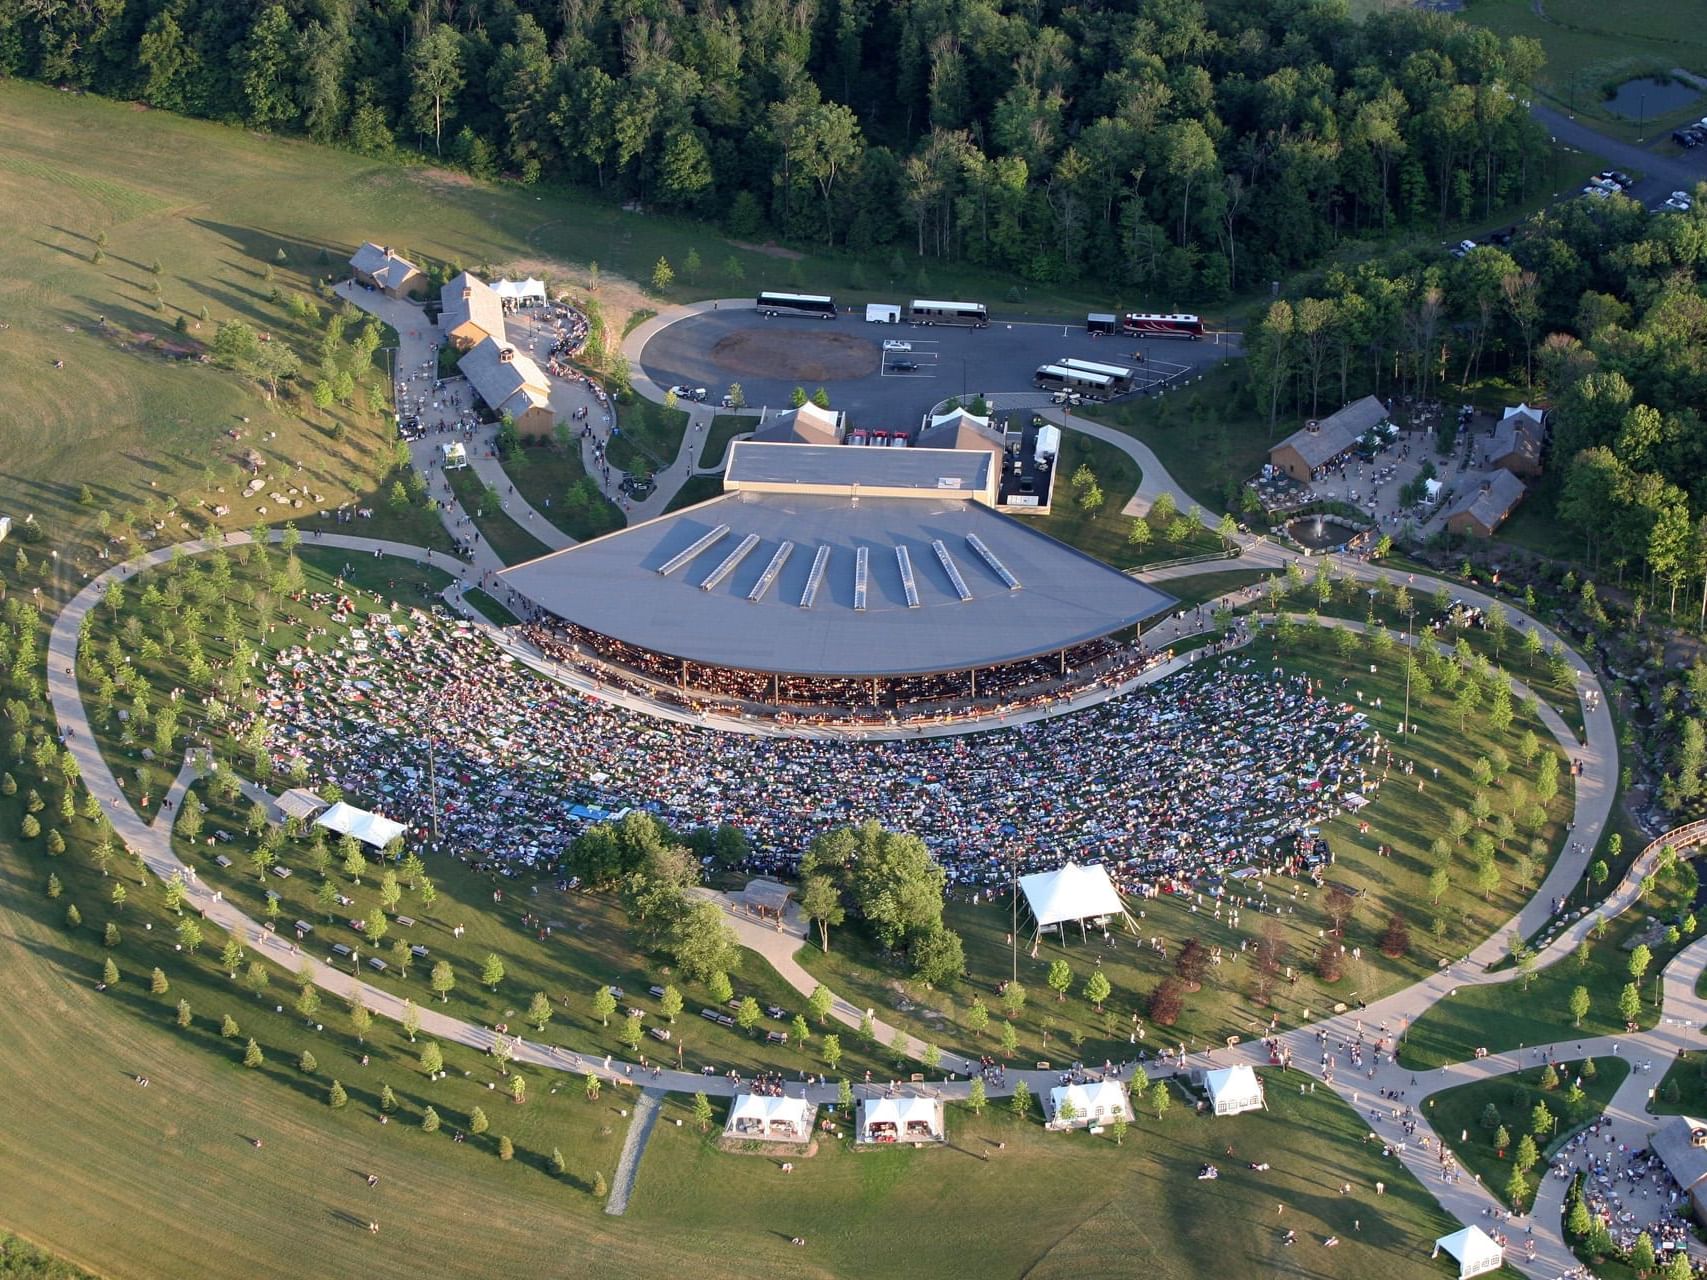 Aerial shot of event venue with crowds of people